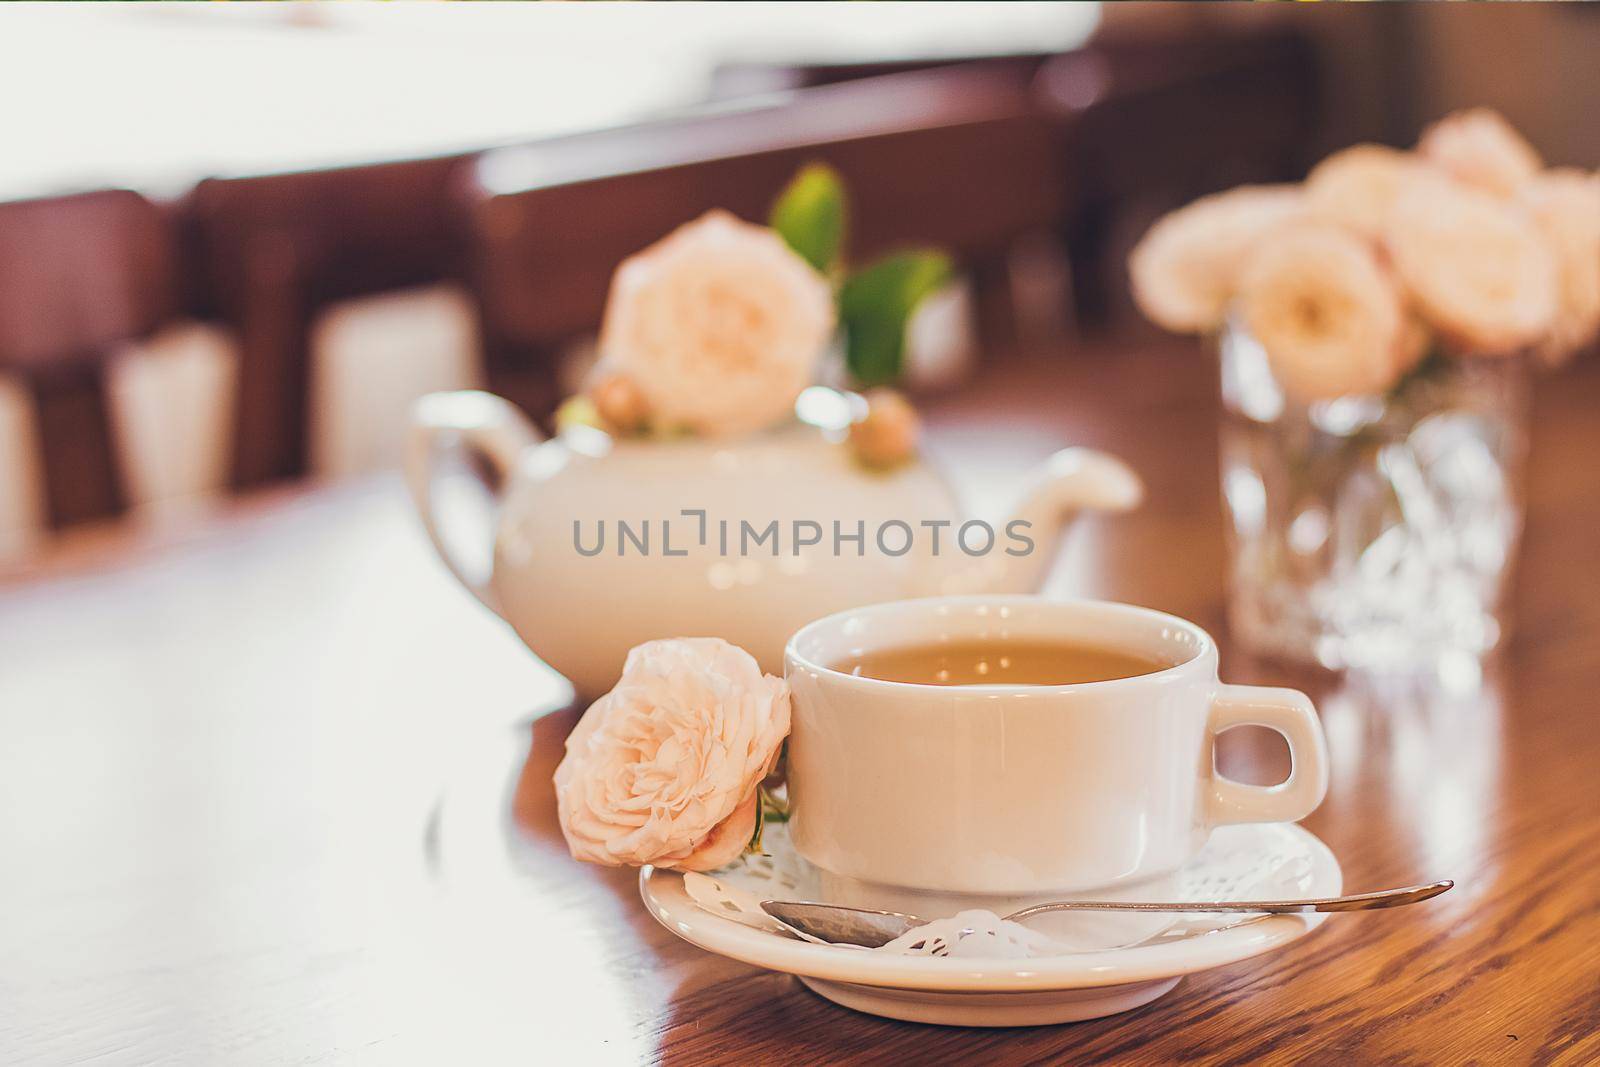 Beautiful fresh roses near a cup of tea and a in pastel tones romantic mood.